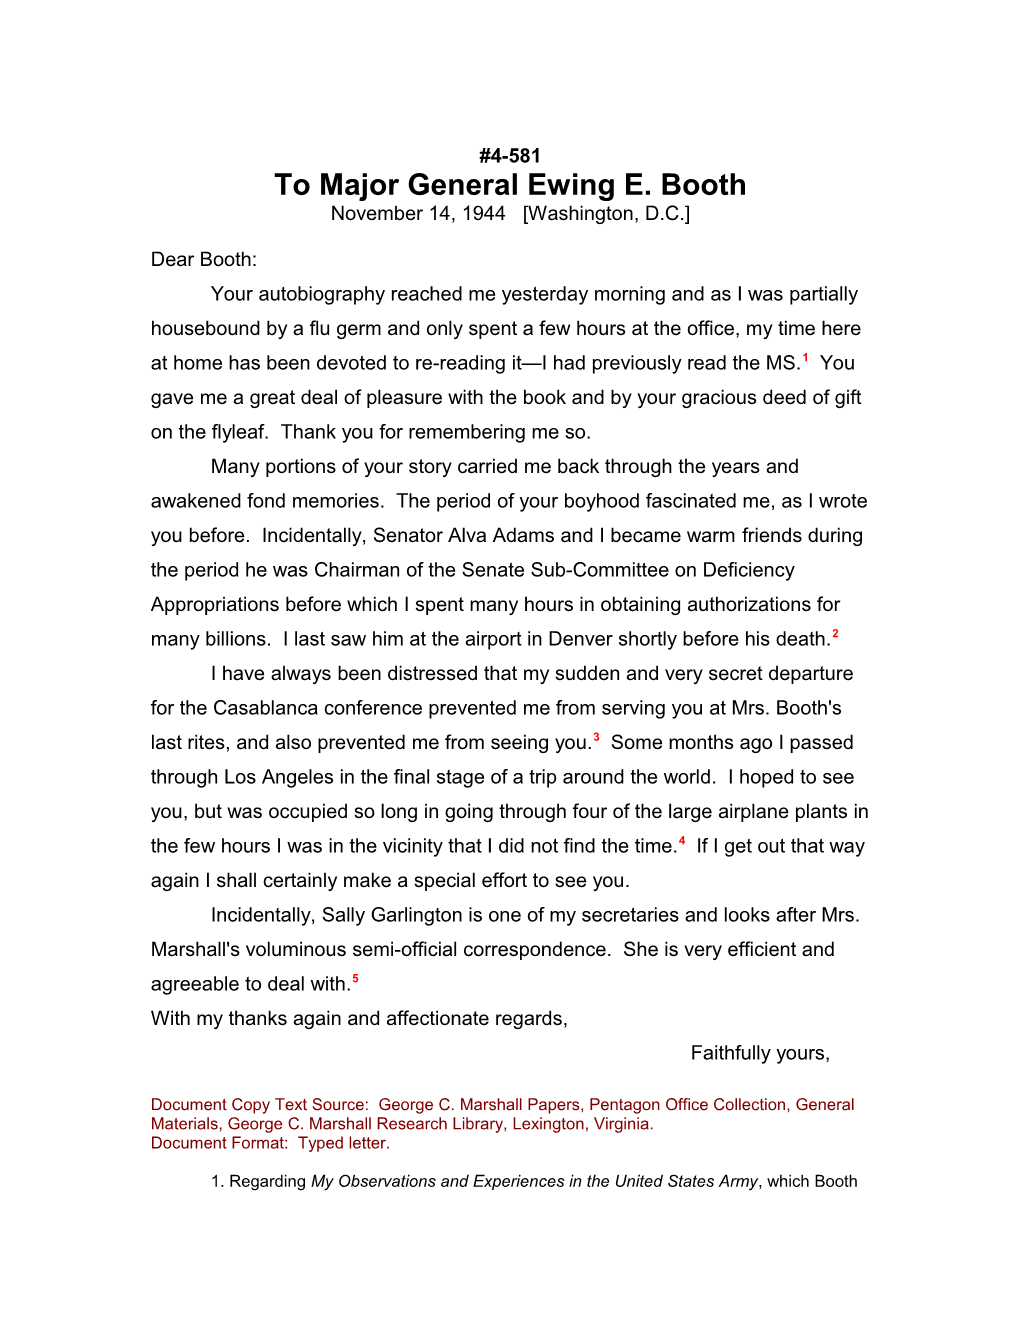 To Major General Ewing E. Booth